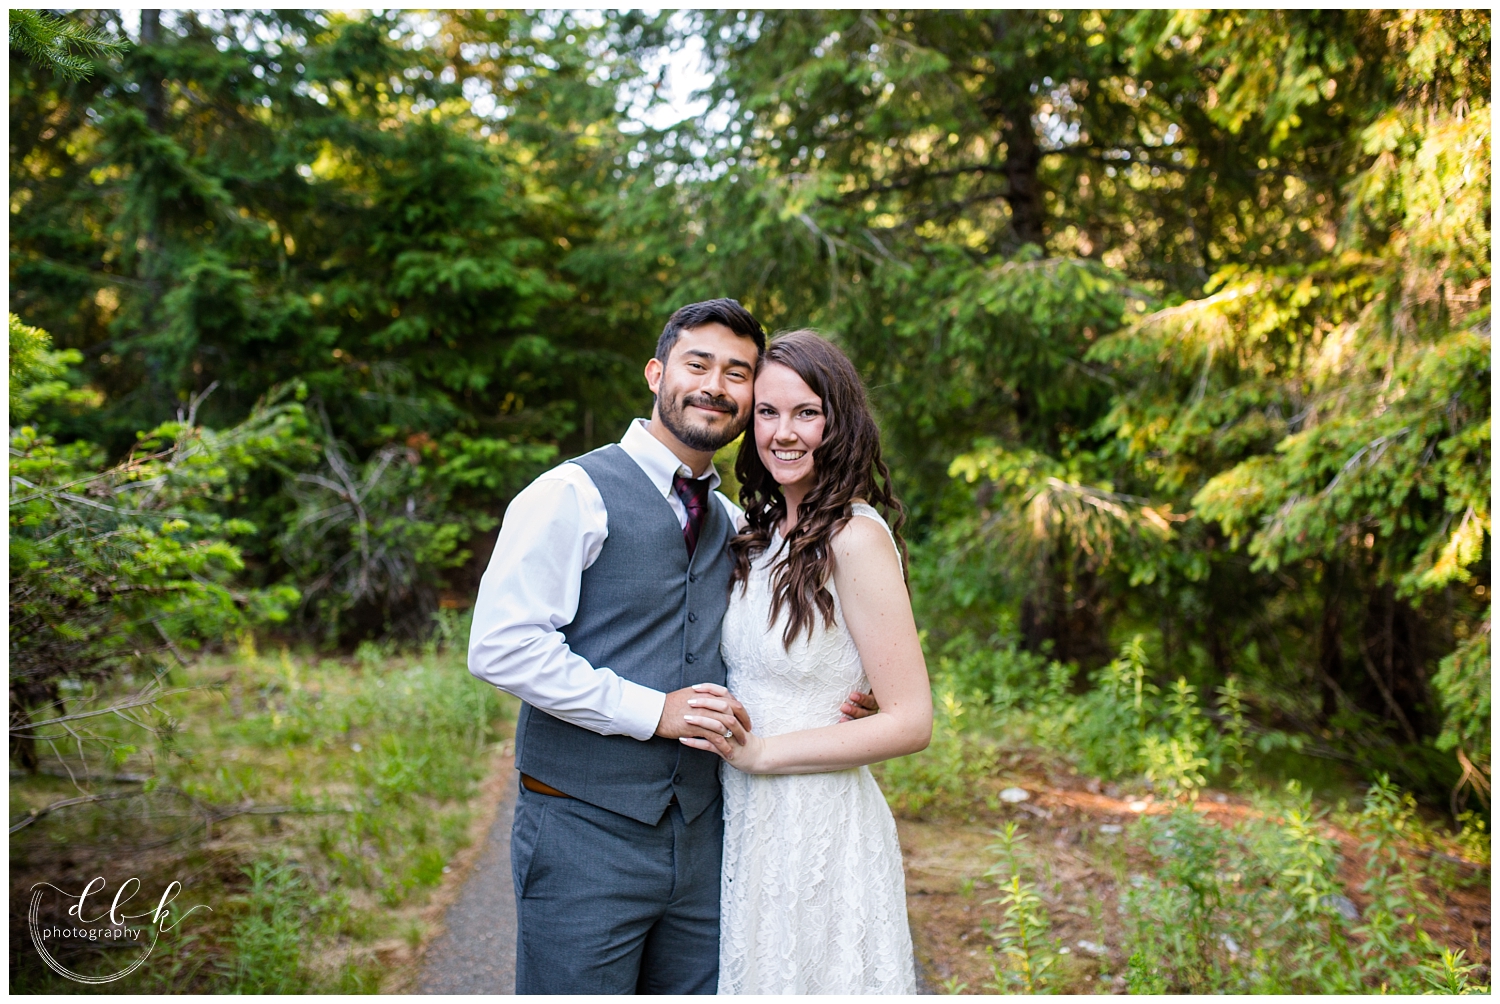 wedding couple wearing white dress and gray suit with purple tie looking at the camera for Gold Creek Pond engagement portraits